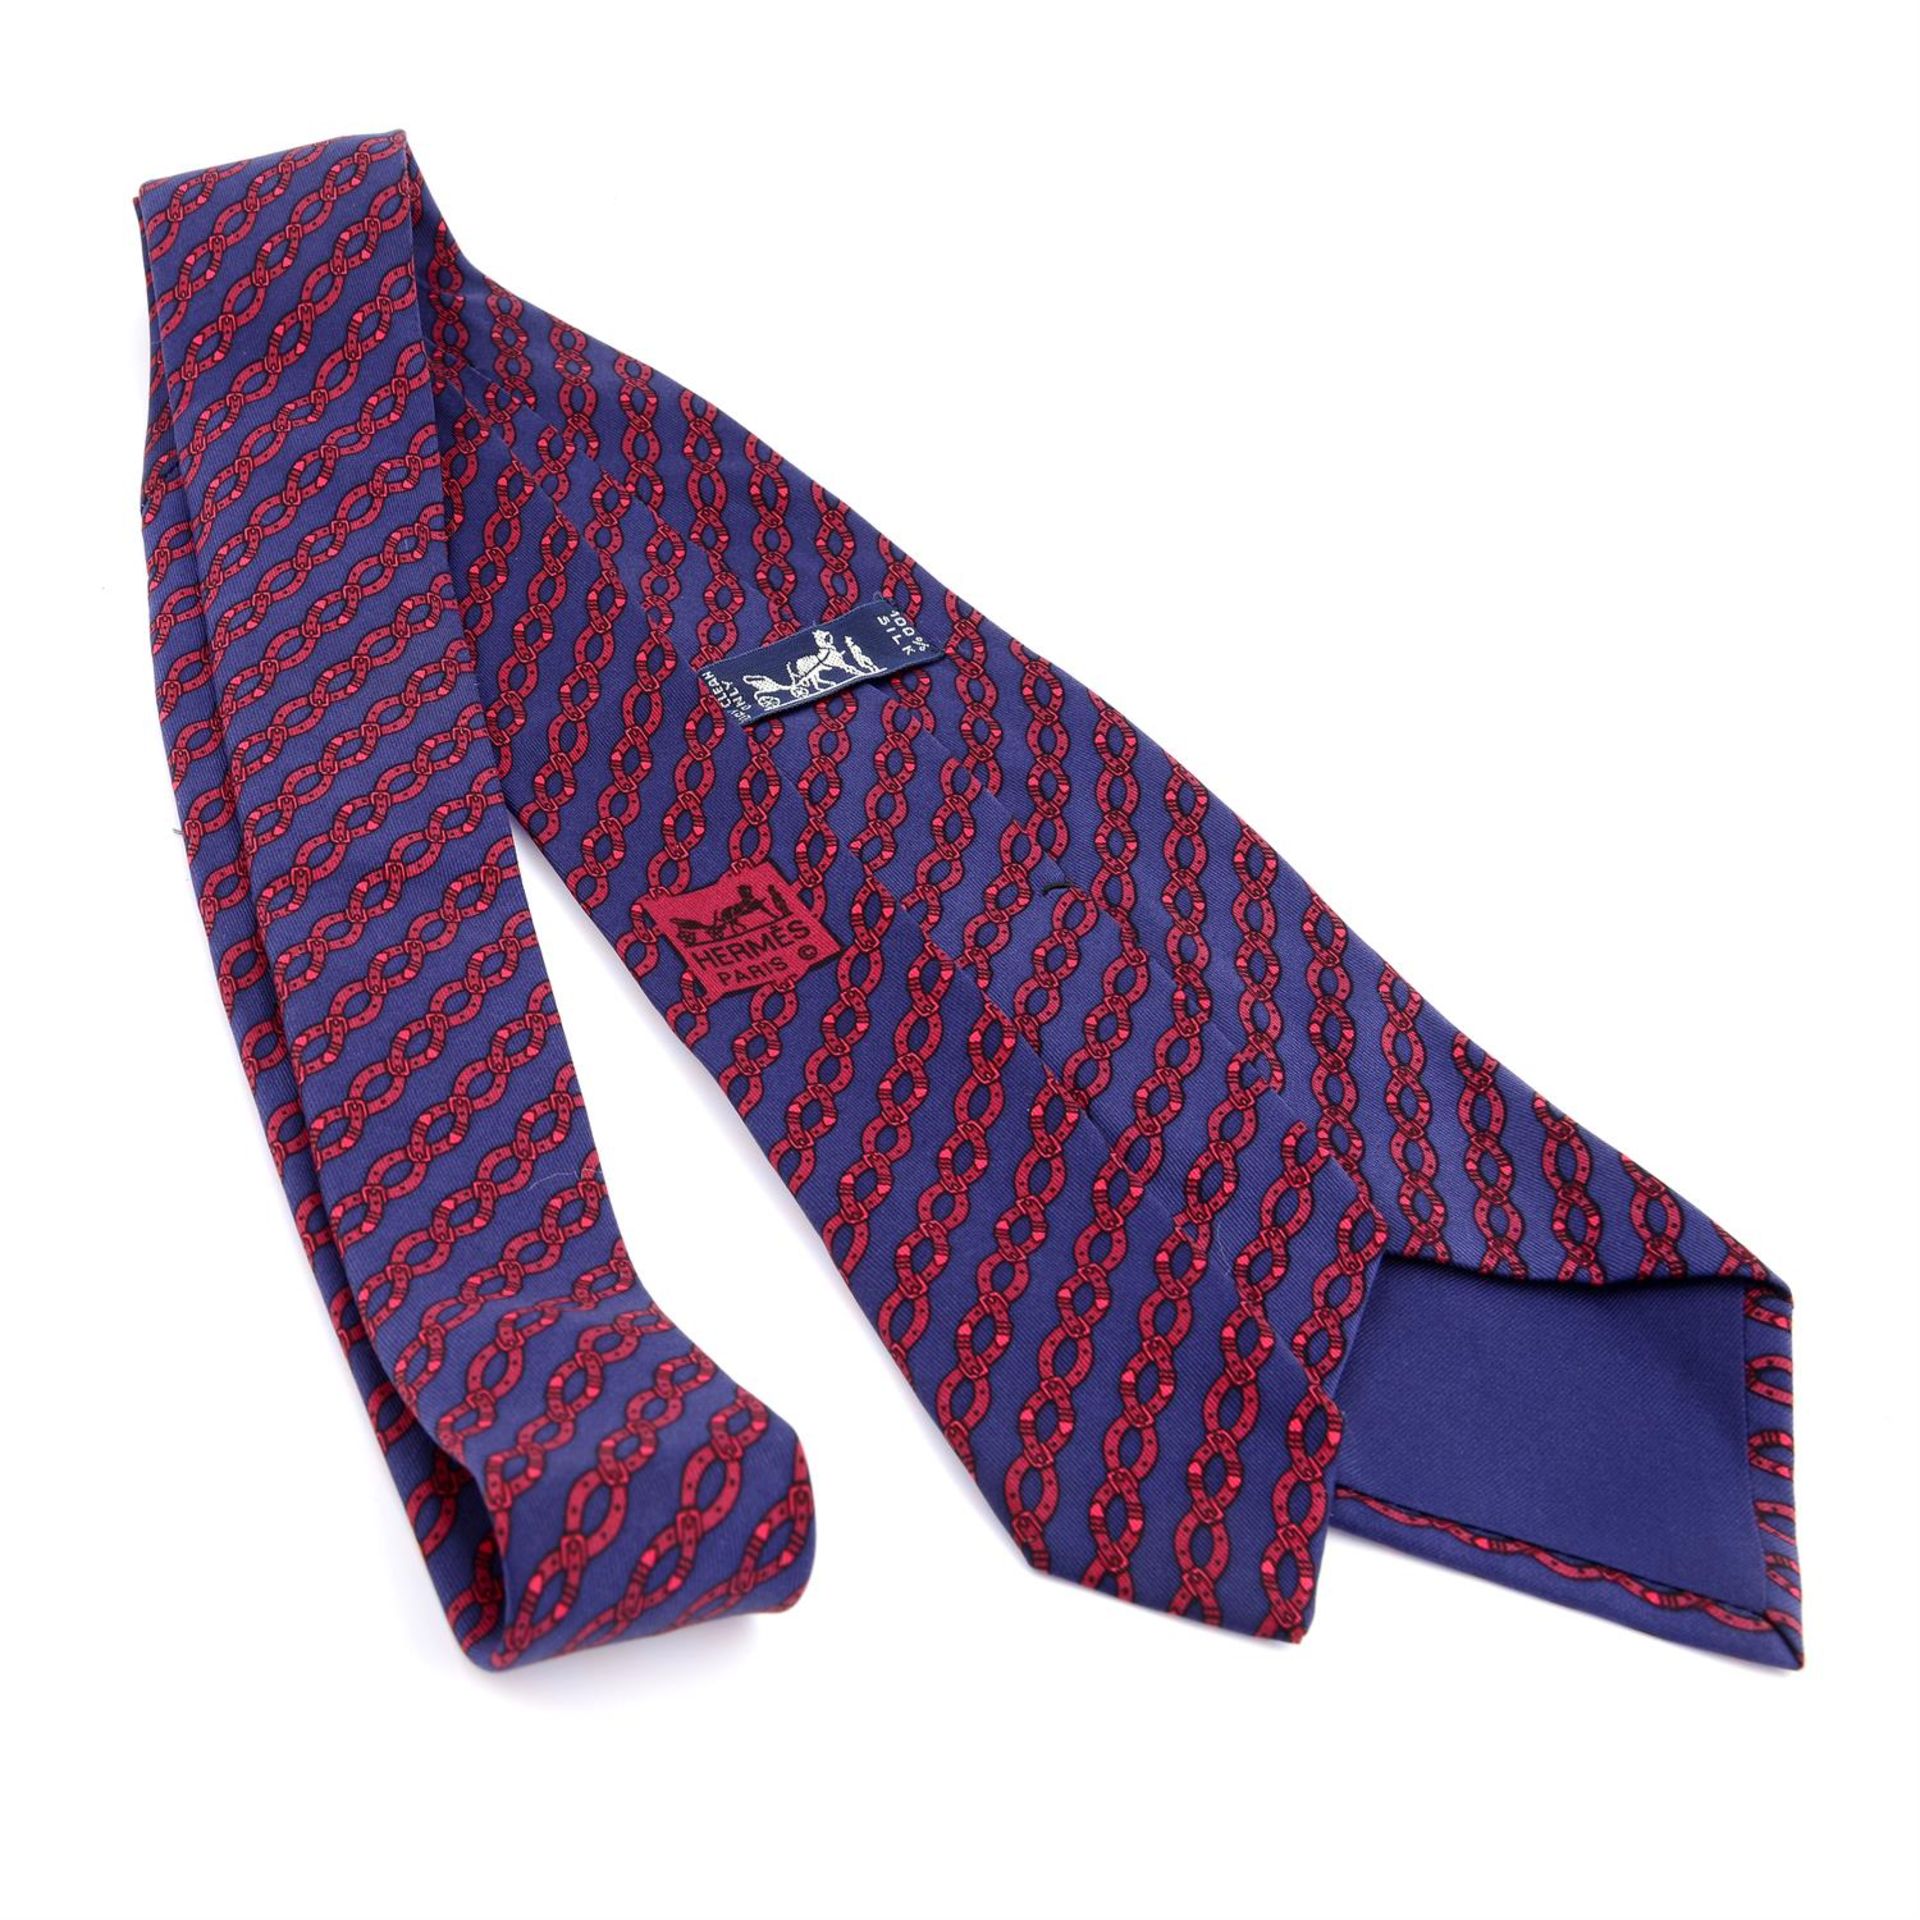 HERMÈS - a blue and red chain print silk tie. - Image 2 of 2